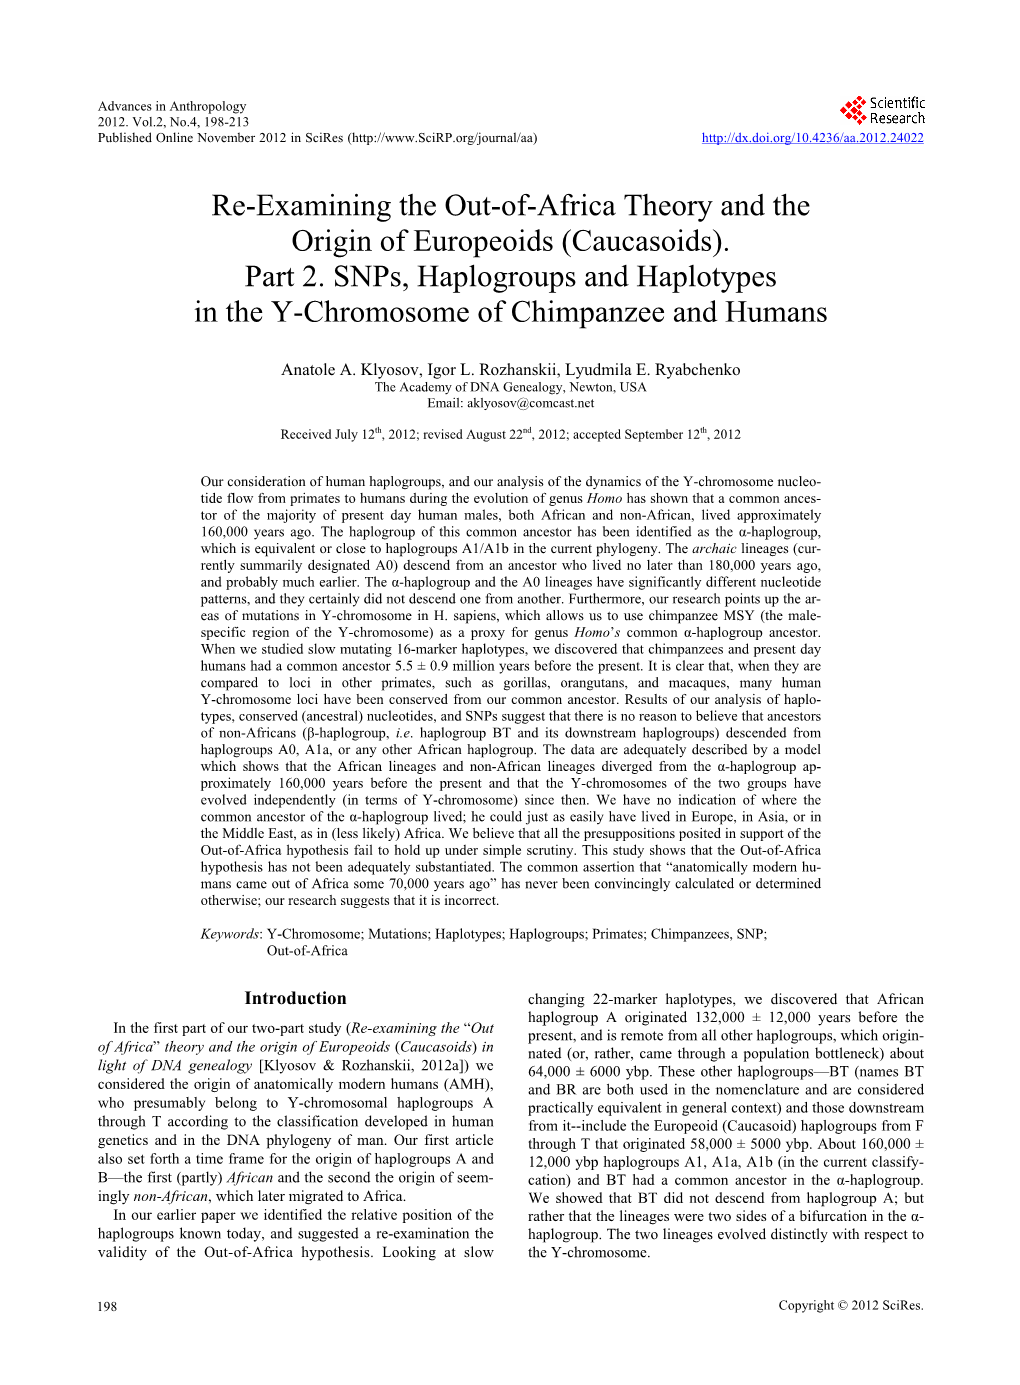 Re-Examining the Out-Of-Africa Theory and the Origin of Europeoids (Caucasoids)